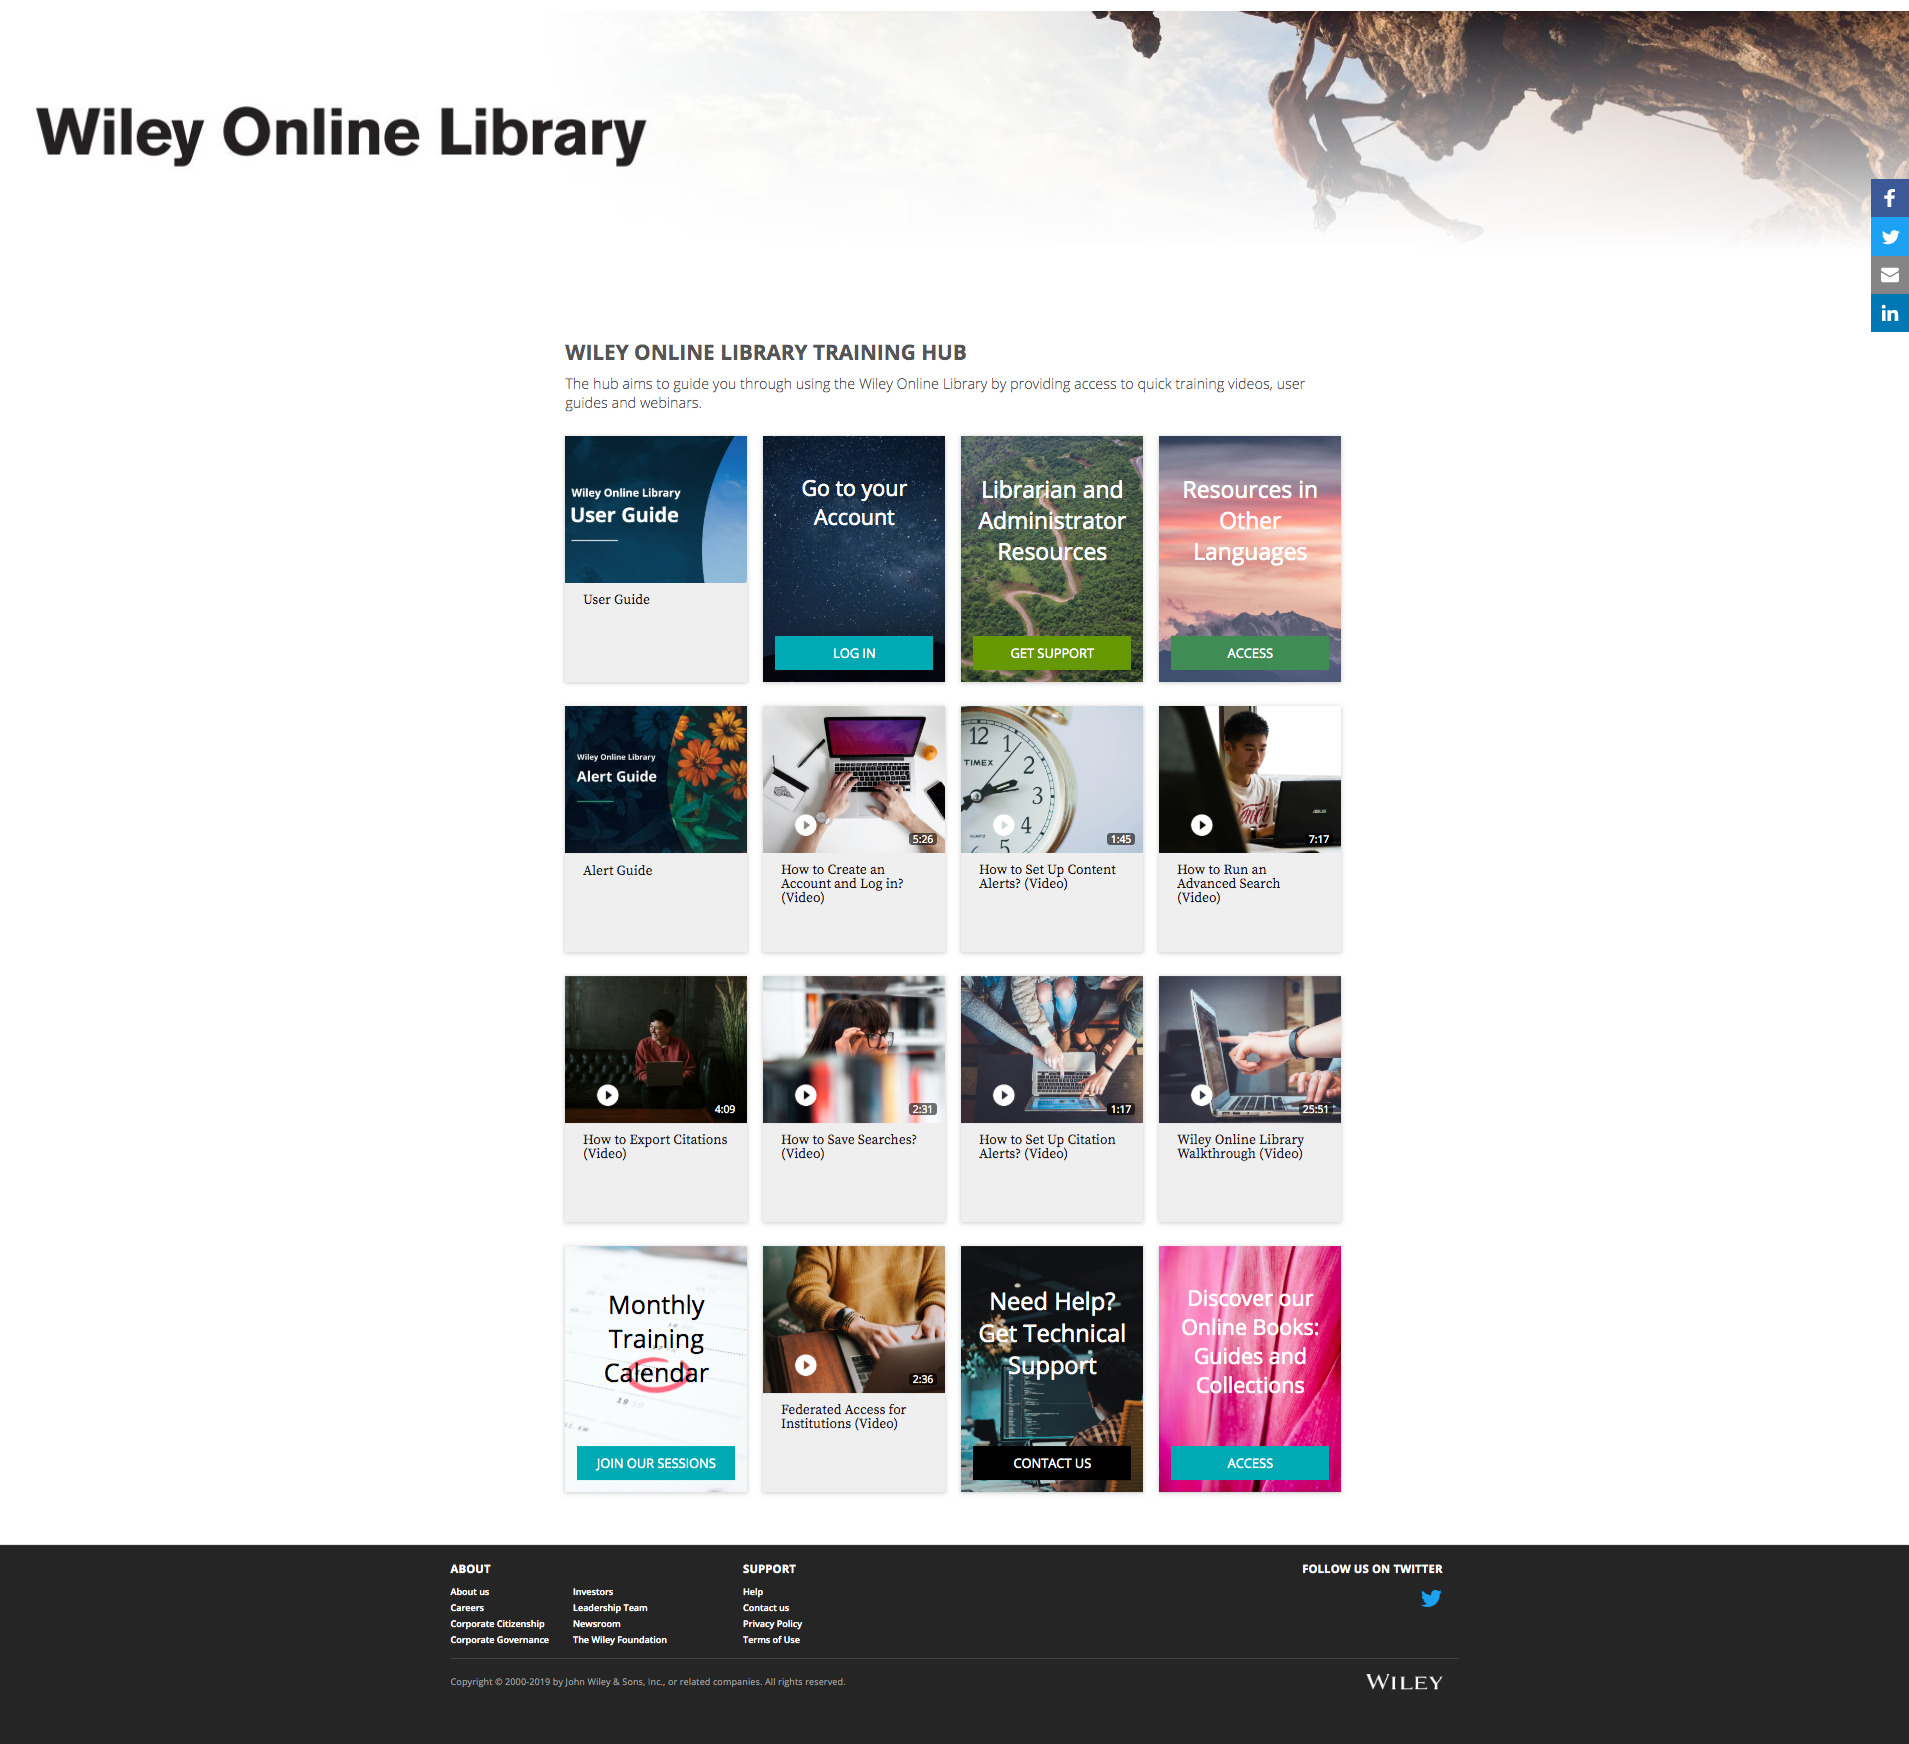 Wiley online library and training resources hub